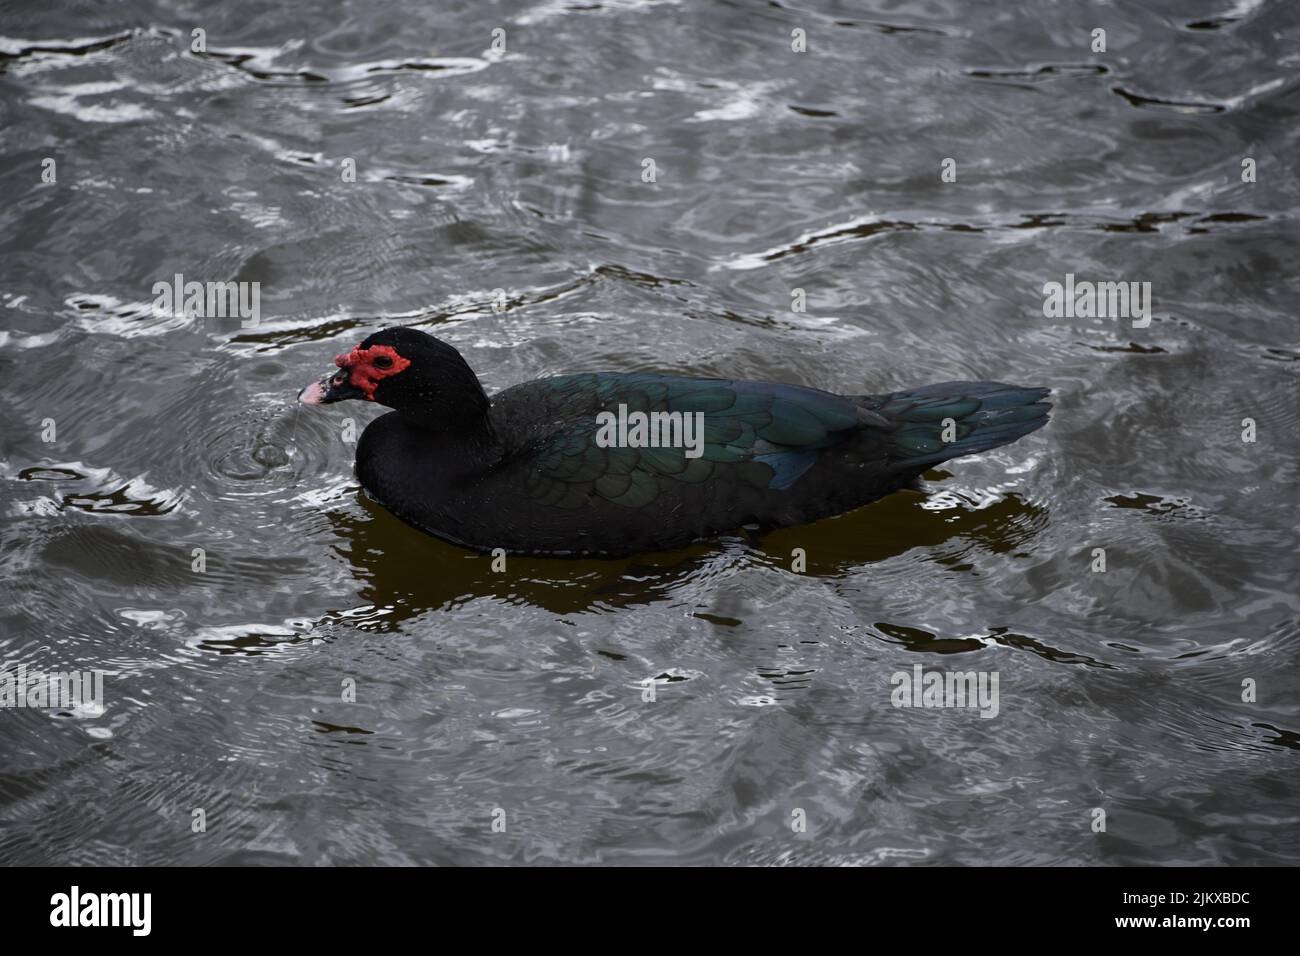 A Muscovy Duck with black feathers swimming in a wavy gray lake Stock Photo